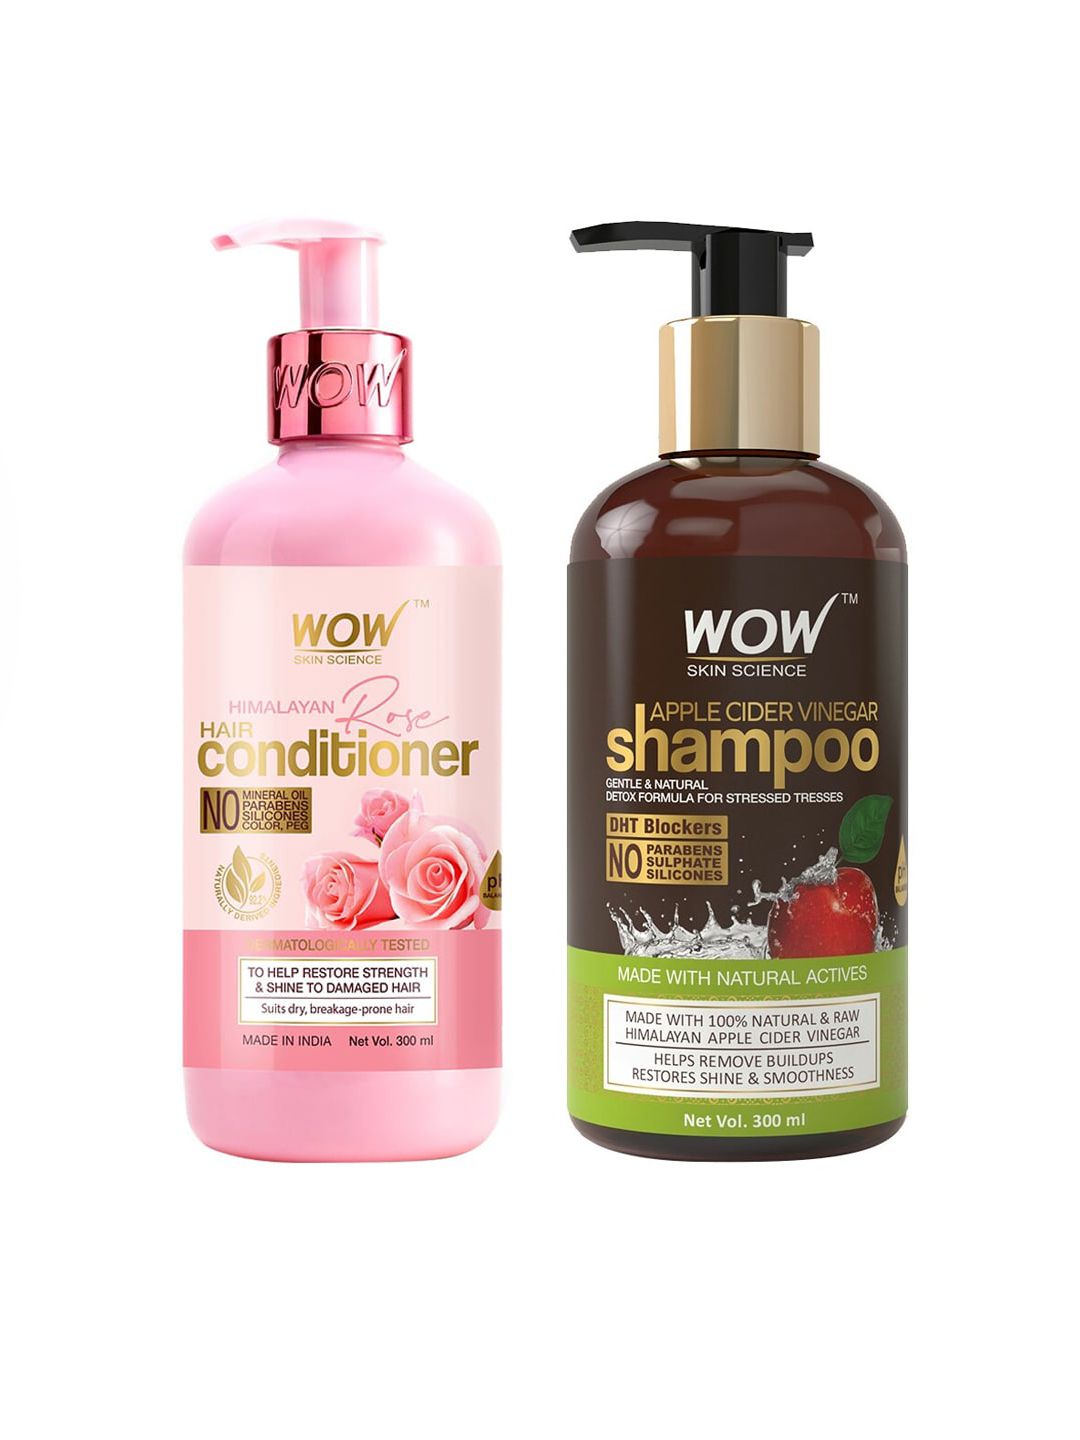 WOW SKIN SCIENCE Unisex Set of ACV Shampoo & Himalayan Rose Conditioner - 600 ml Price in India